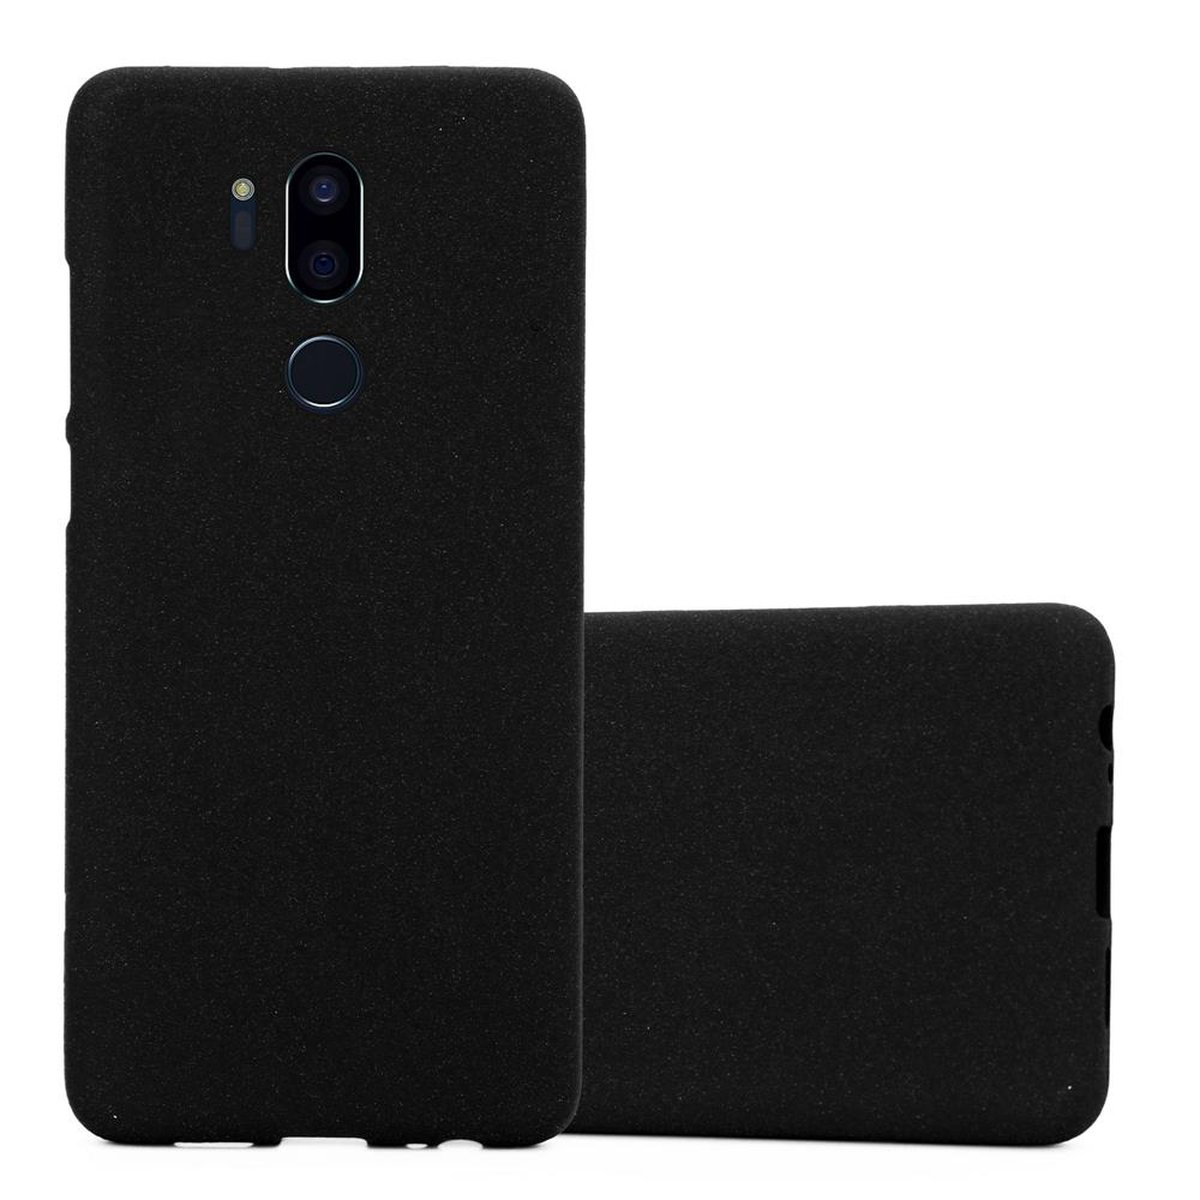 FROST / CADORABO TPU ONE, Frosted LG, FIT Schutzhülle, SCHWARZ G7 ThinQ / Backcover,